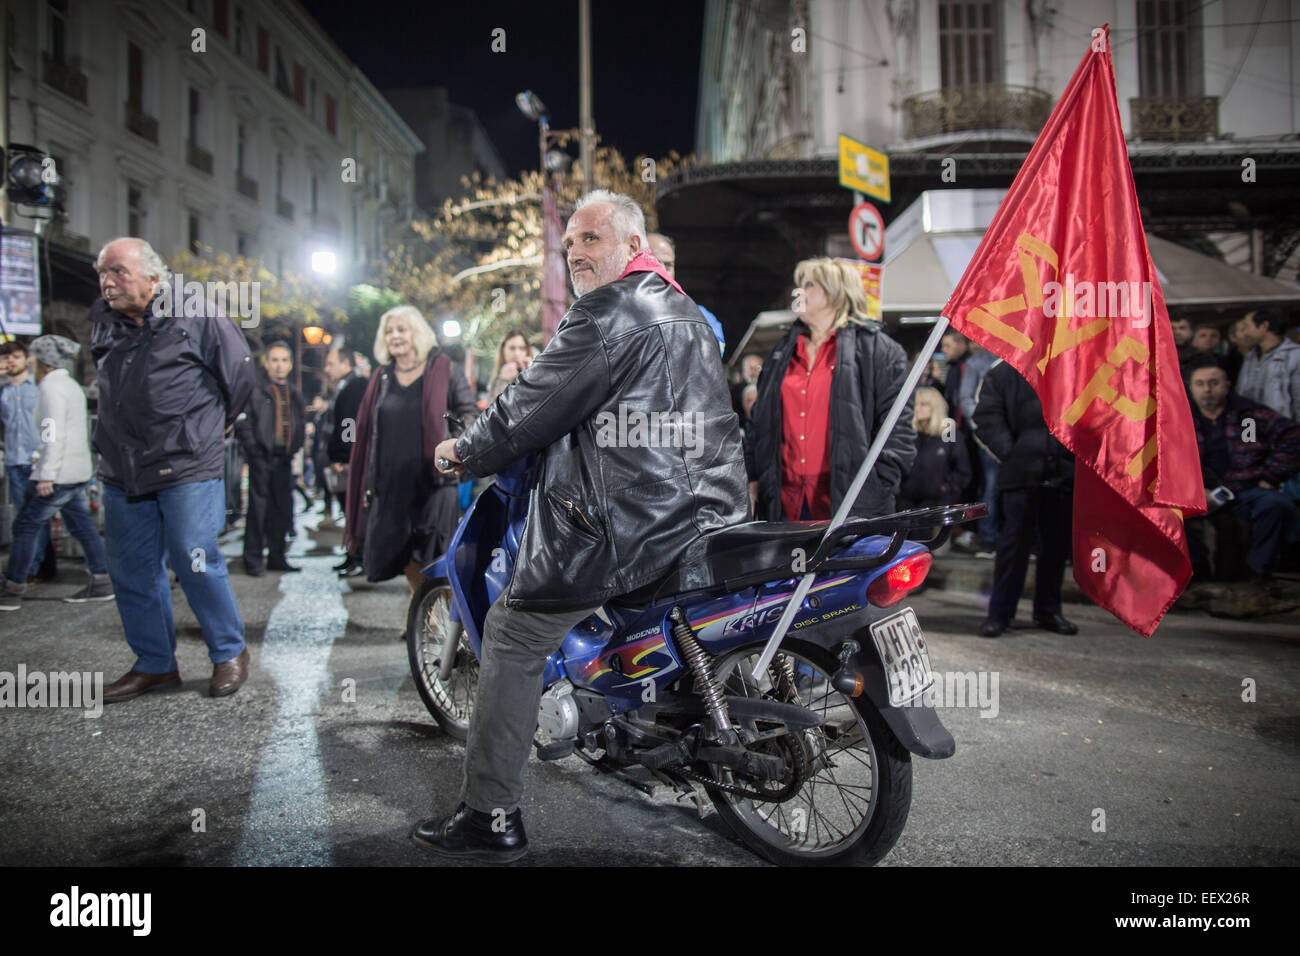 A supporter of he radical left main opposition party SYRIZA is seen with a red flag on his motorbike prior to the last preelection rally of the Alexis Tsipras, in Athens, 22 January 2015. Greece's leftist, anti-austerity Syriza party has widened its lead at the top for the 25 January 2015 elections. Michael Kappeler/dpa (zu dpa 'Vor griechischer Schicksalswahl Linkspartei deutlich vorn' am 22.01.2015) Stock Photo